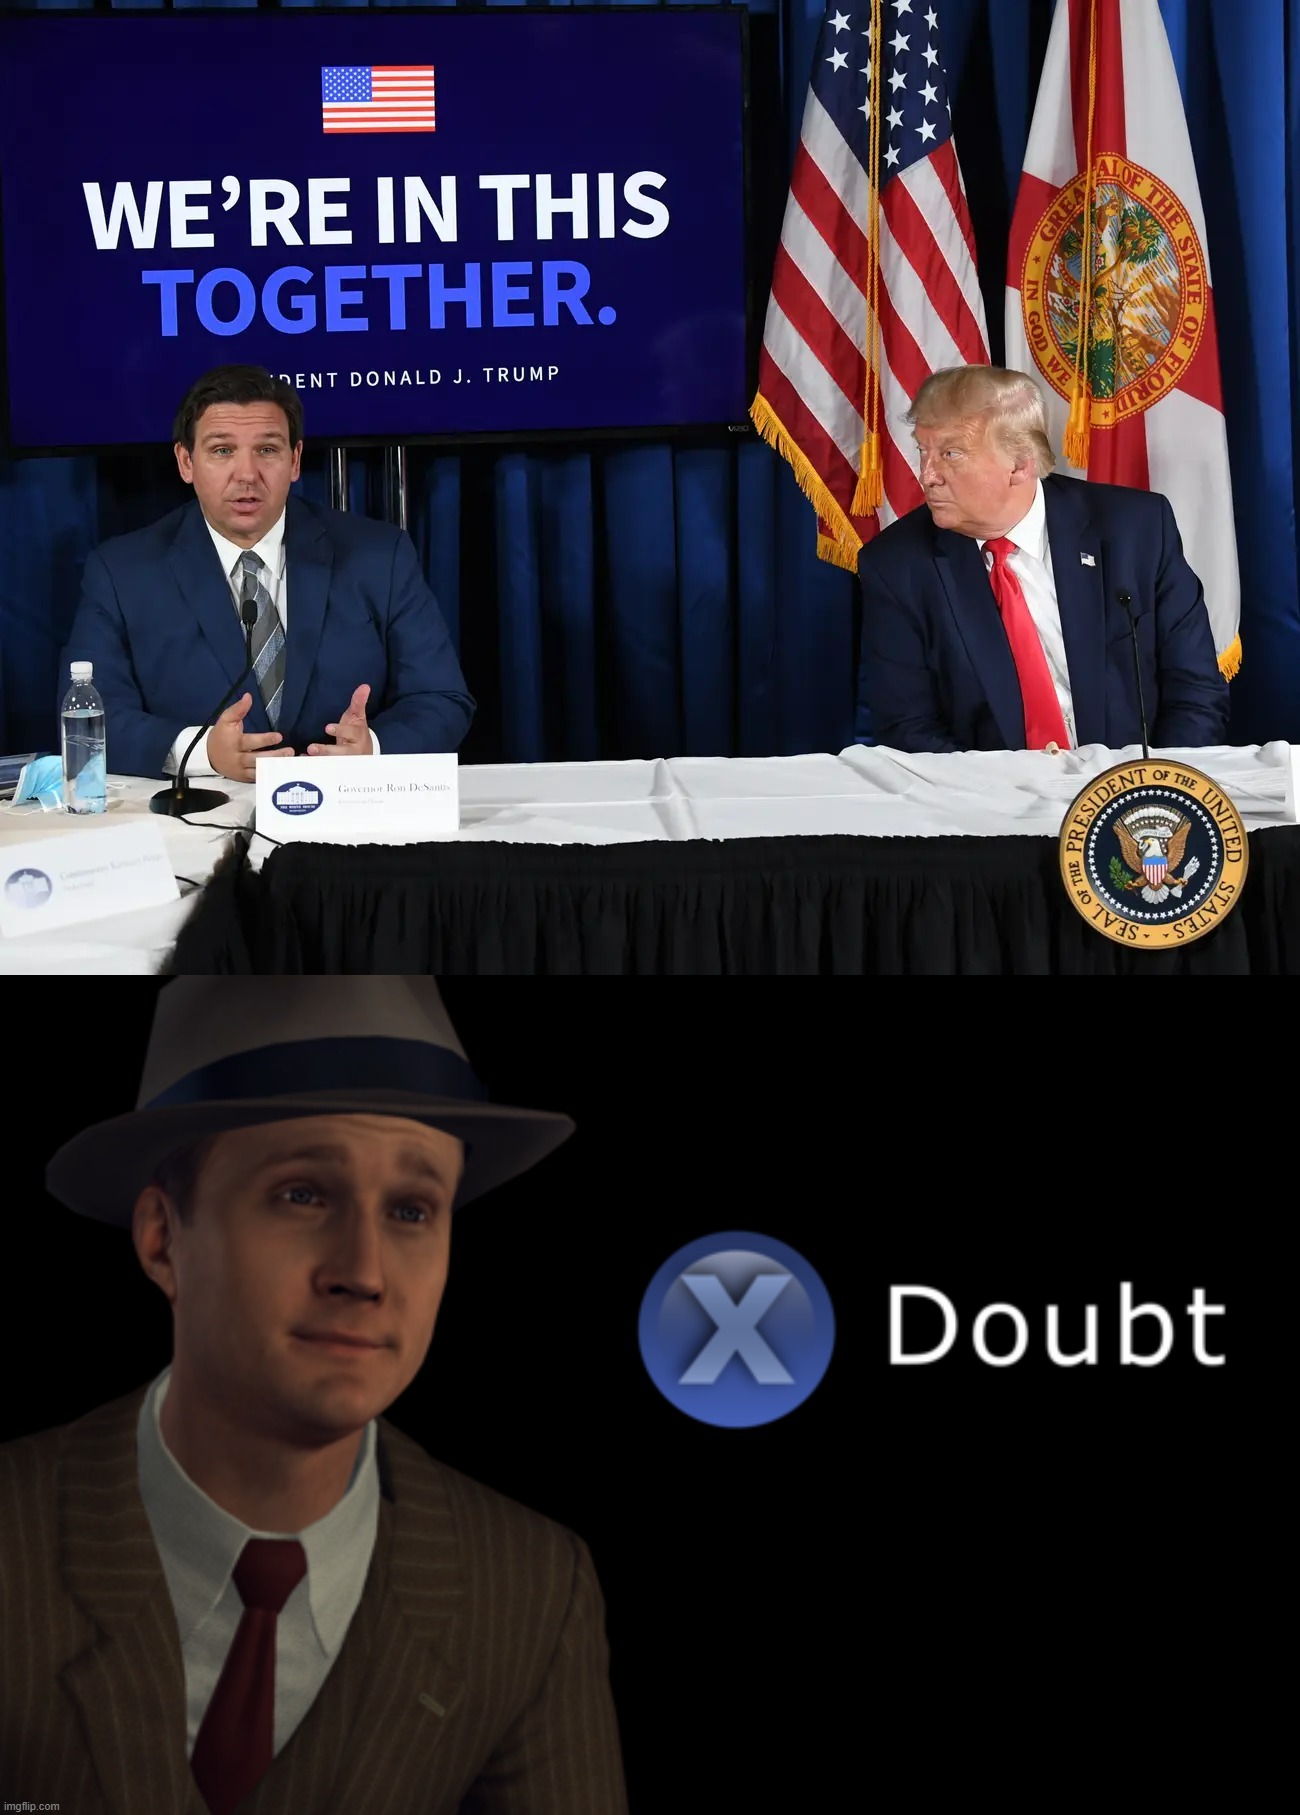 Does Trump's look at DeSantis give you warm fuzzy "in this together" vibes? XD | image tagged in trump and desantis we're in this together,x doubt,trump,donald trump,ron desantis,2022 | made w/ Imgflip meme maker